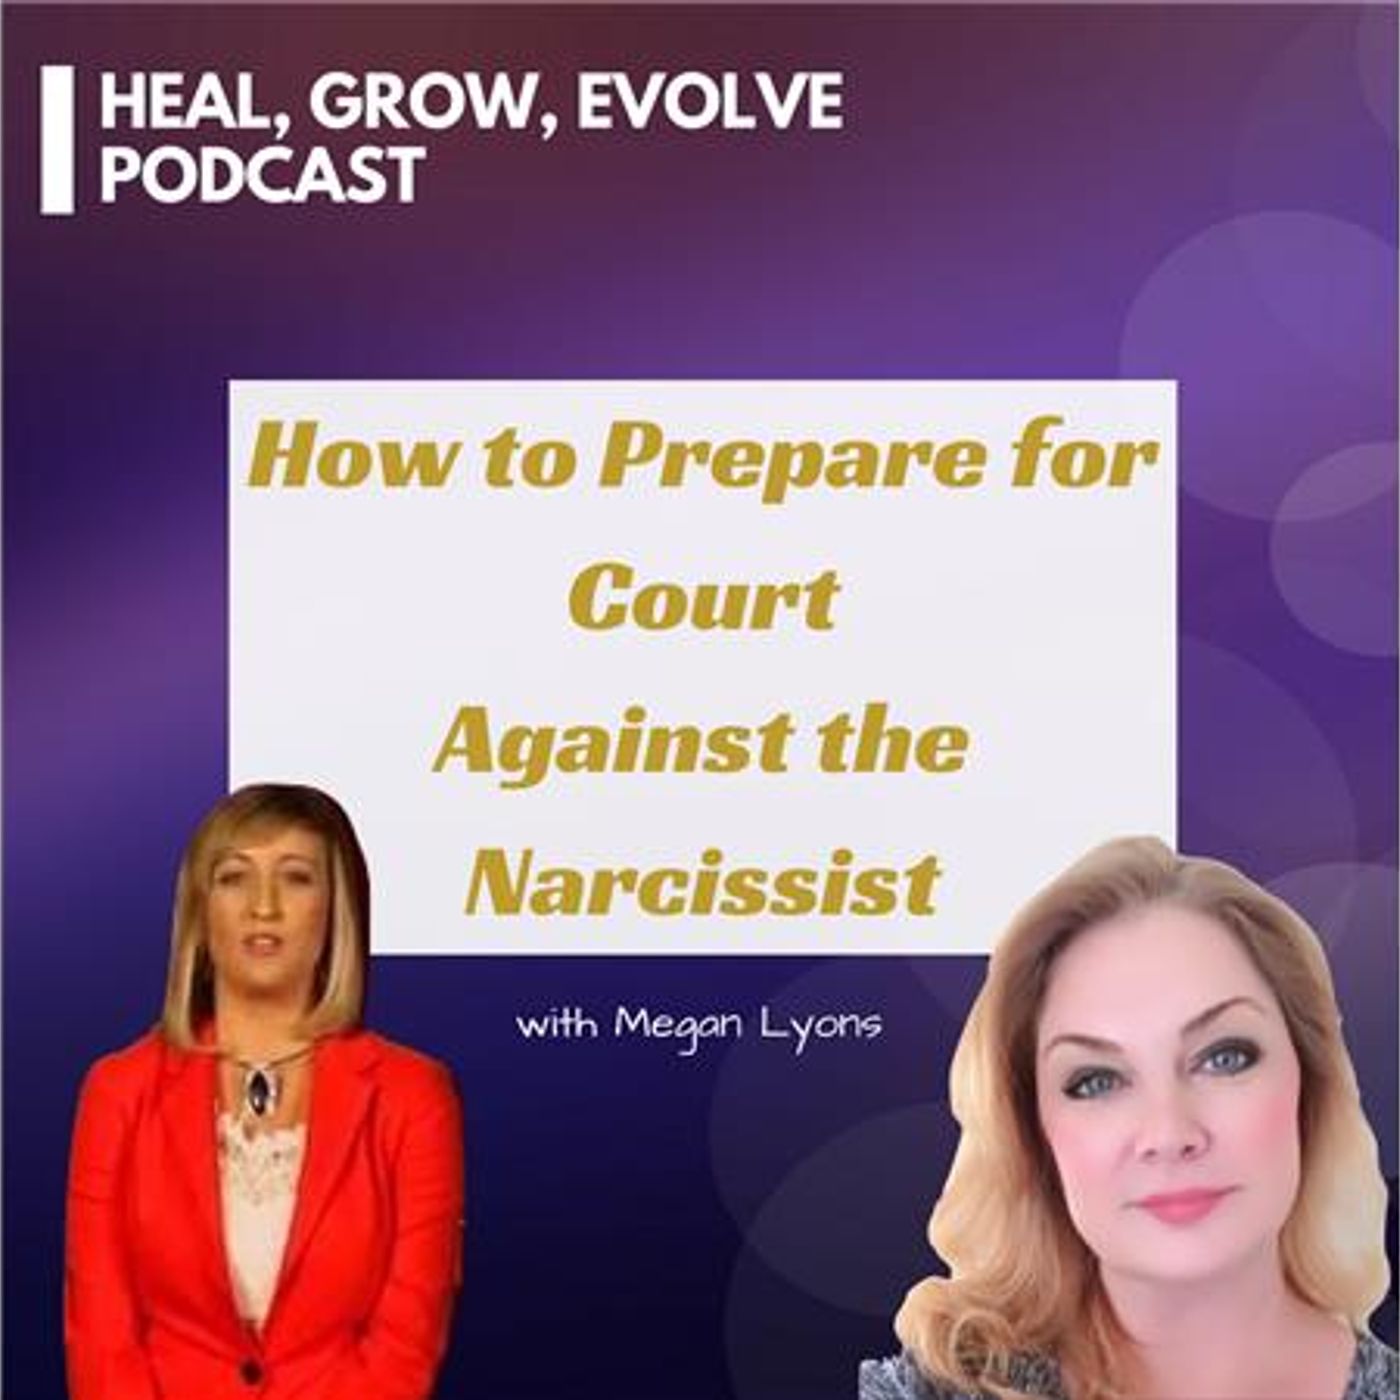 How to Prepare for Court Against the Narcissist - with attorney Megan Lyons